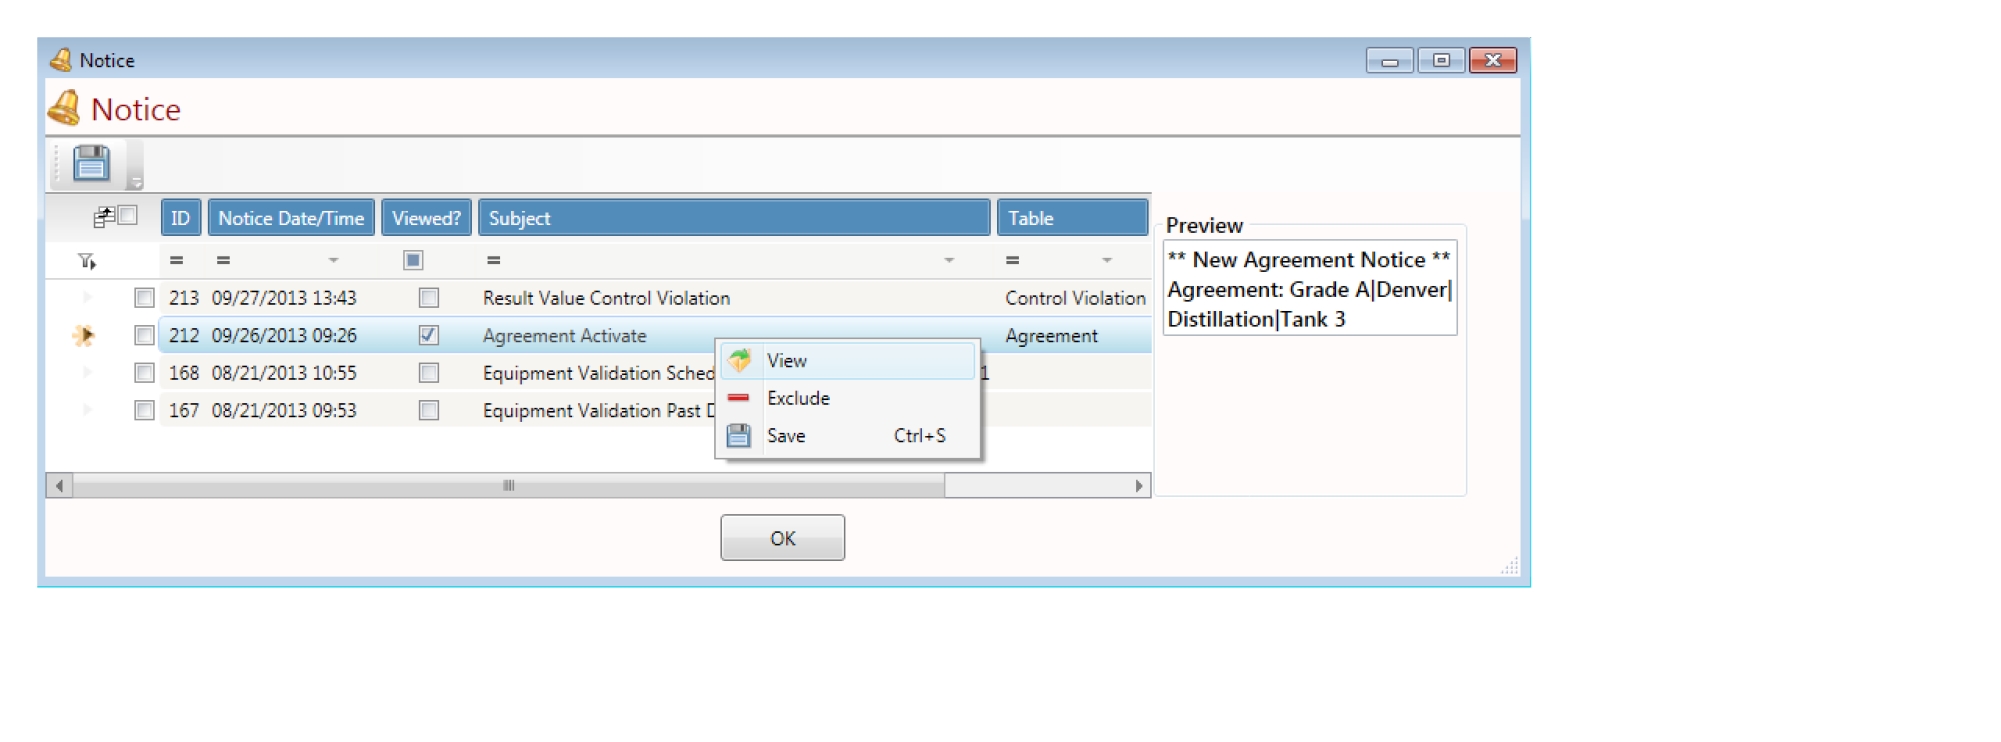 LabSoft LIMS Software Notices Screenshot